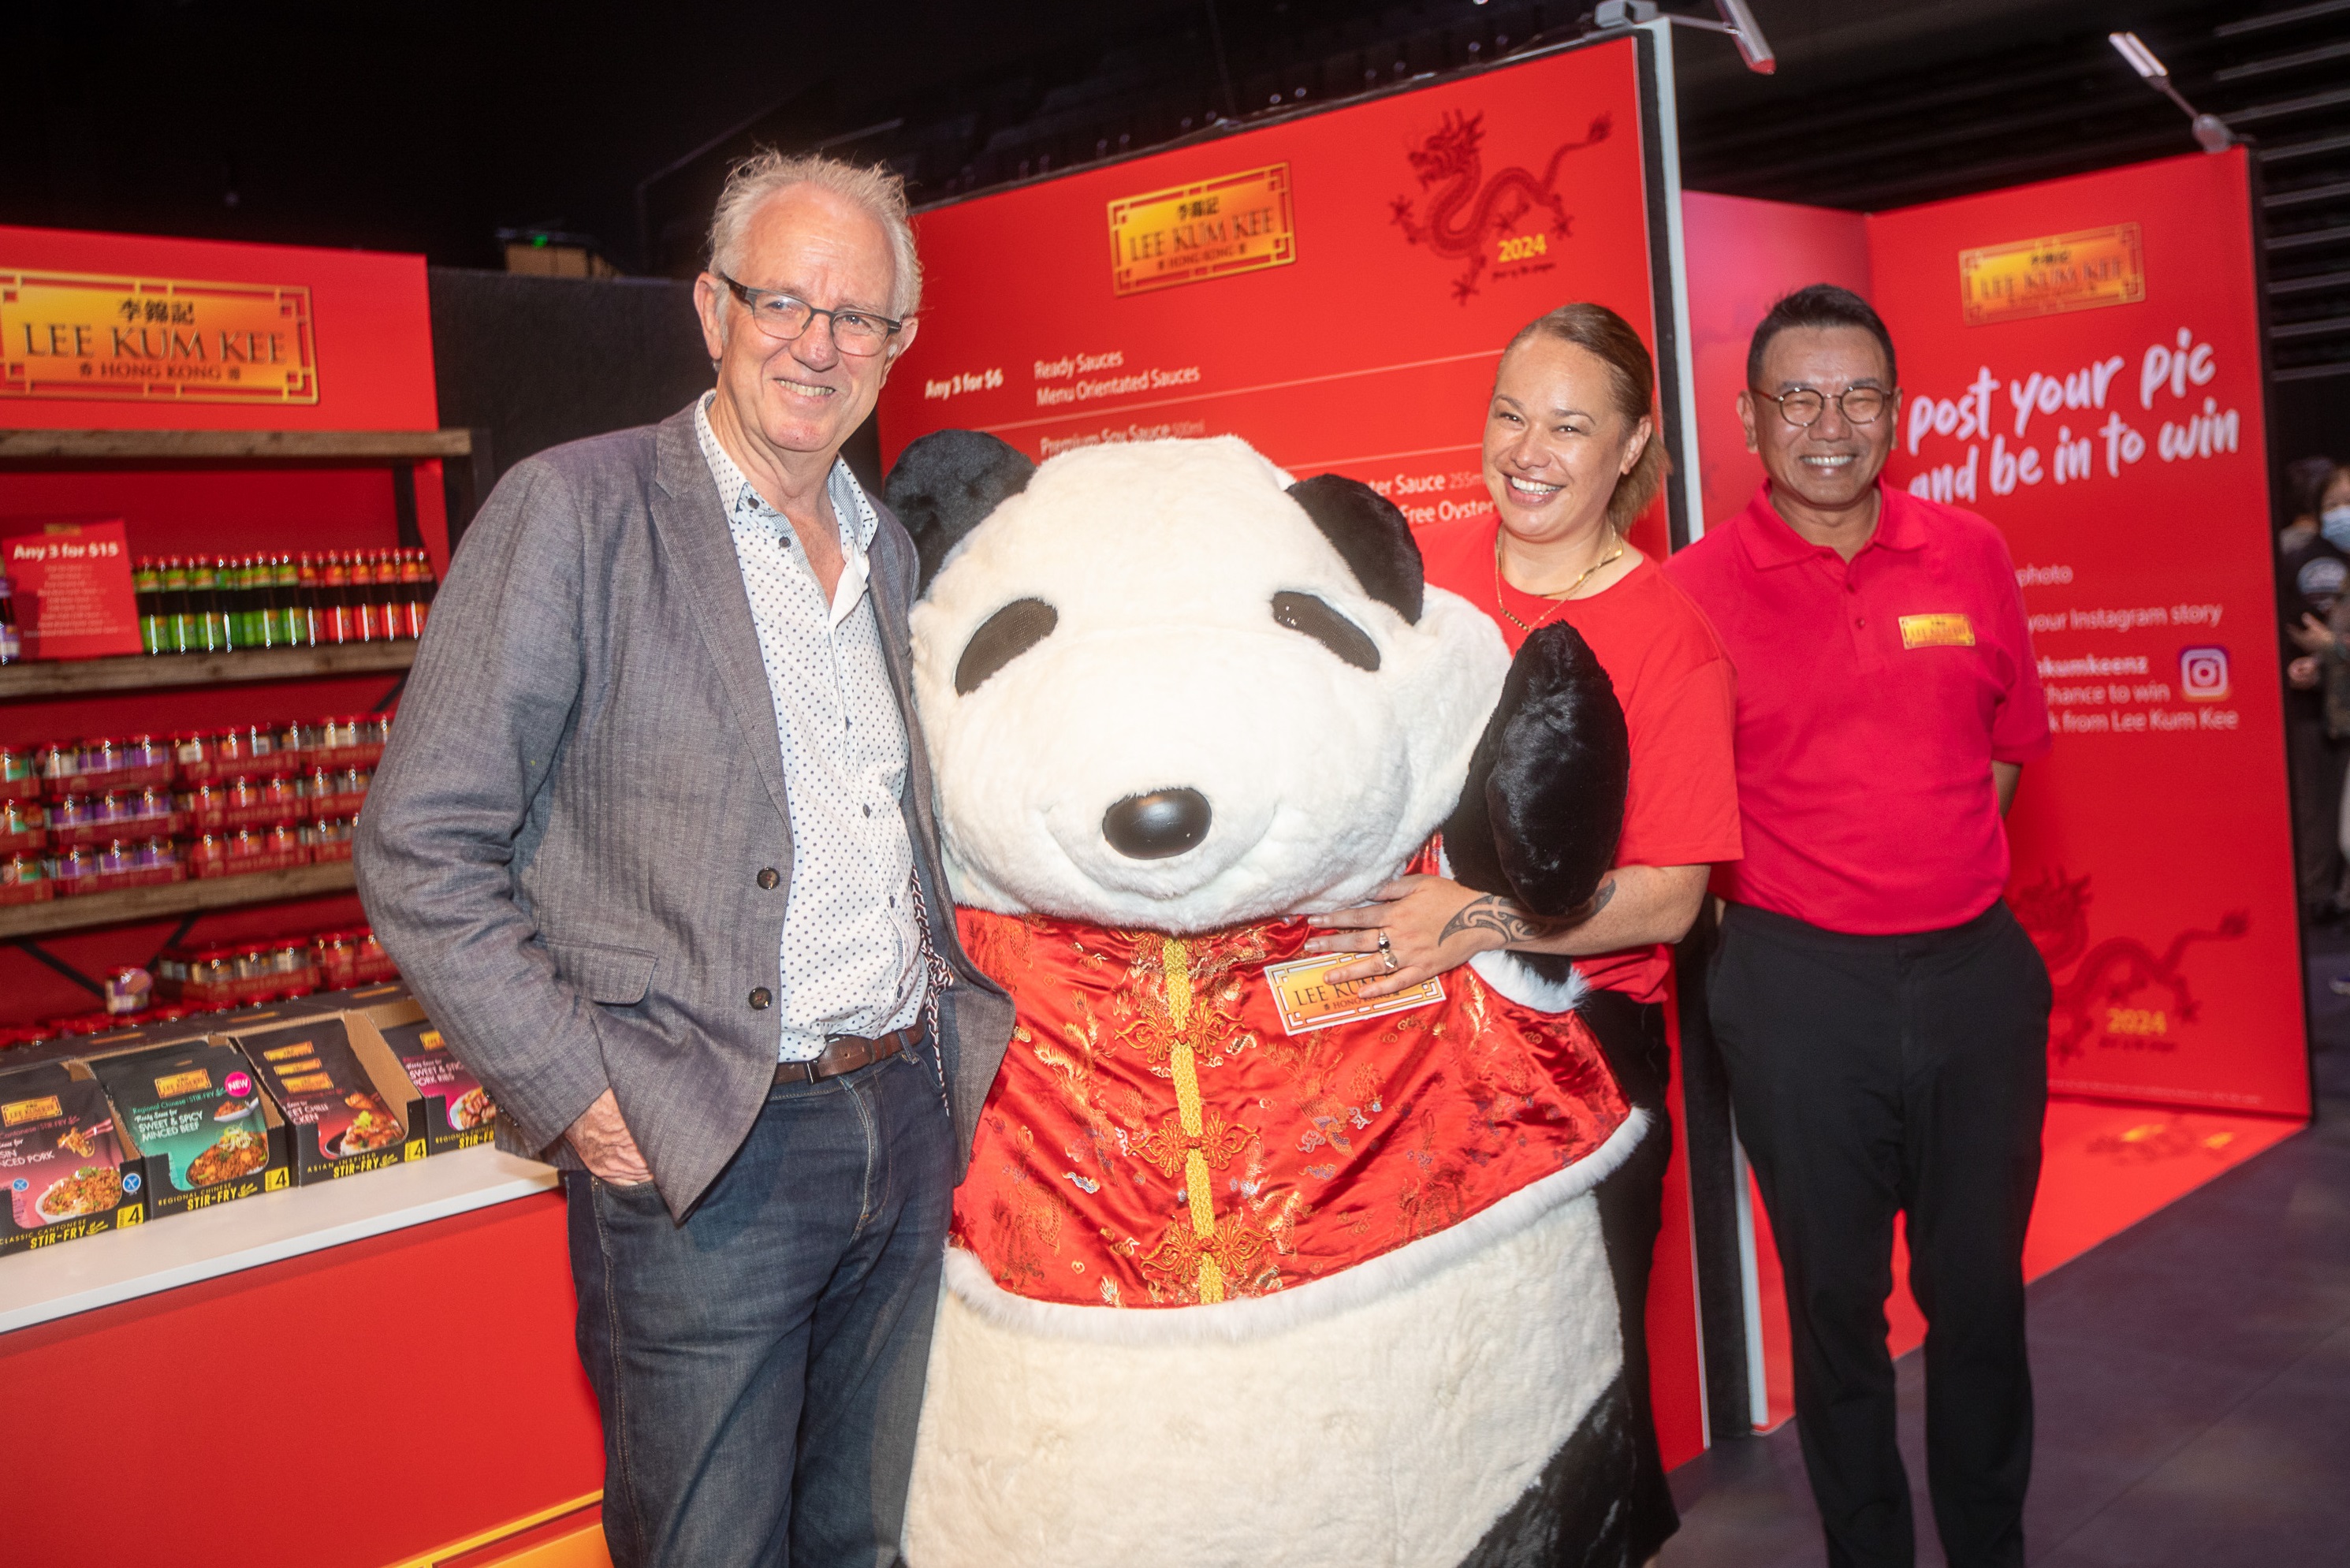 Greg O’Connor, Member of Parliament for Ōhāriu, Tory Whanau, Mayor of Wellington and Dodie Hung, Executive Vice President – Corporate Affairs of Lee Kum Kee picture at Lee Kum Kee booth.